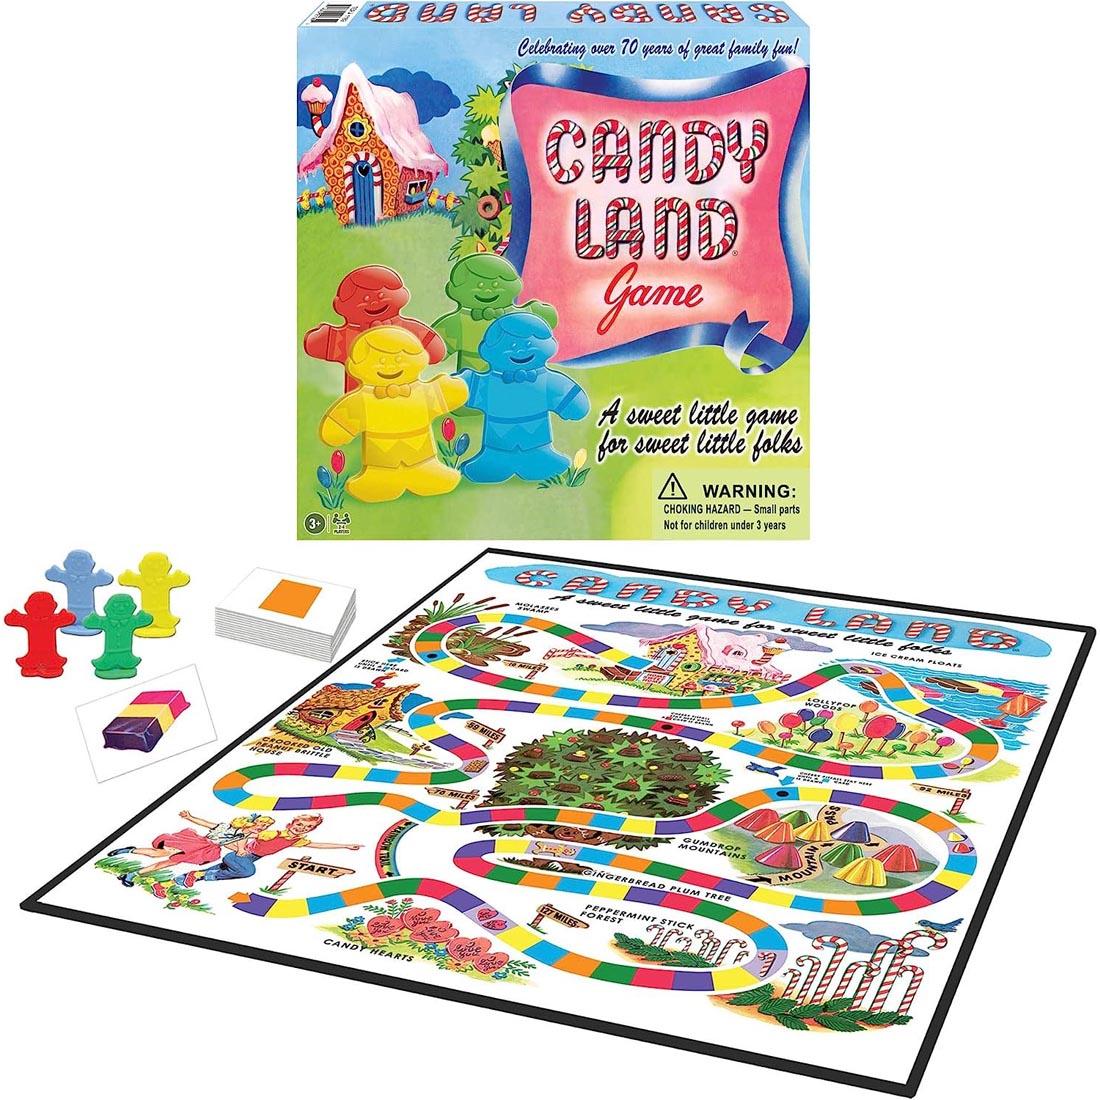 box and contents of Candy Land Game